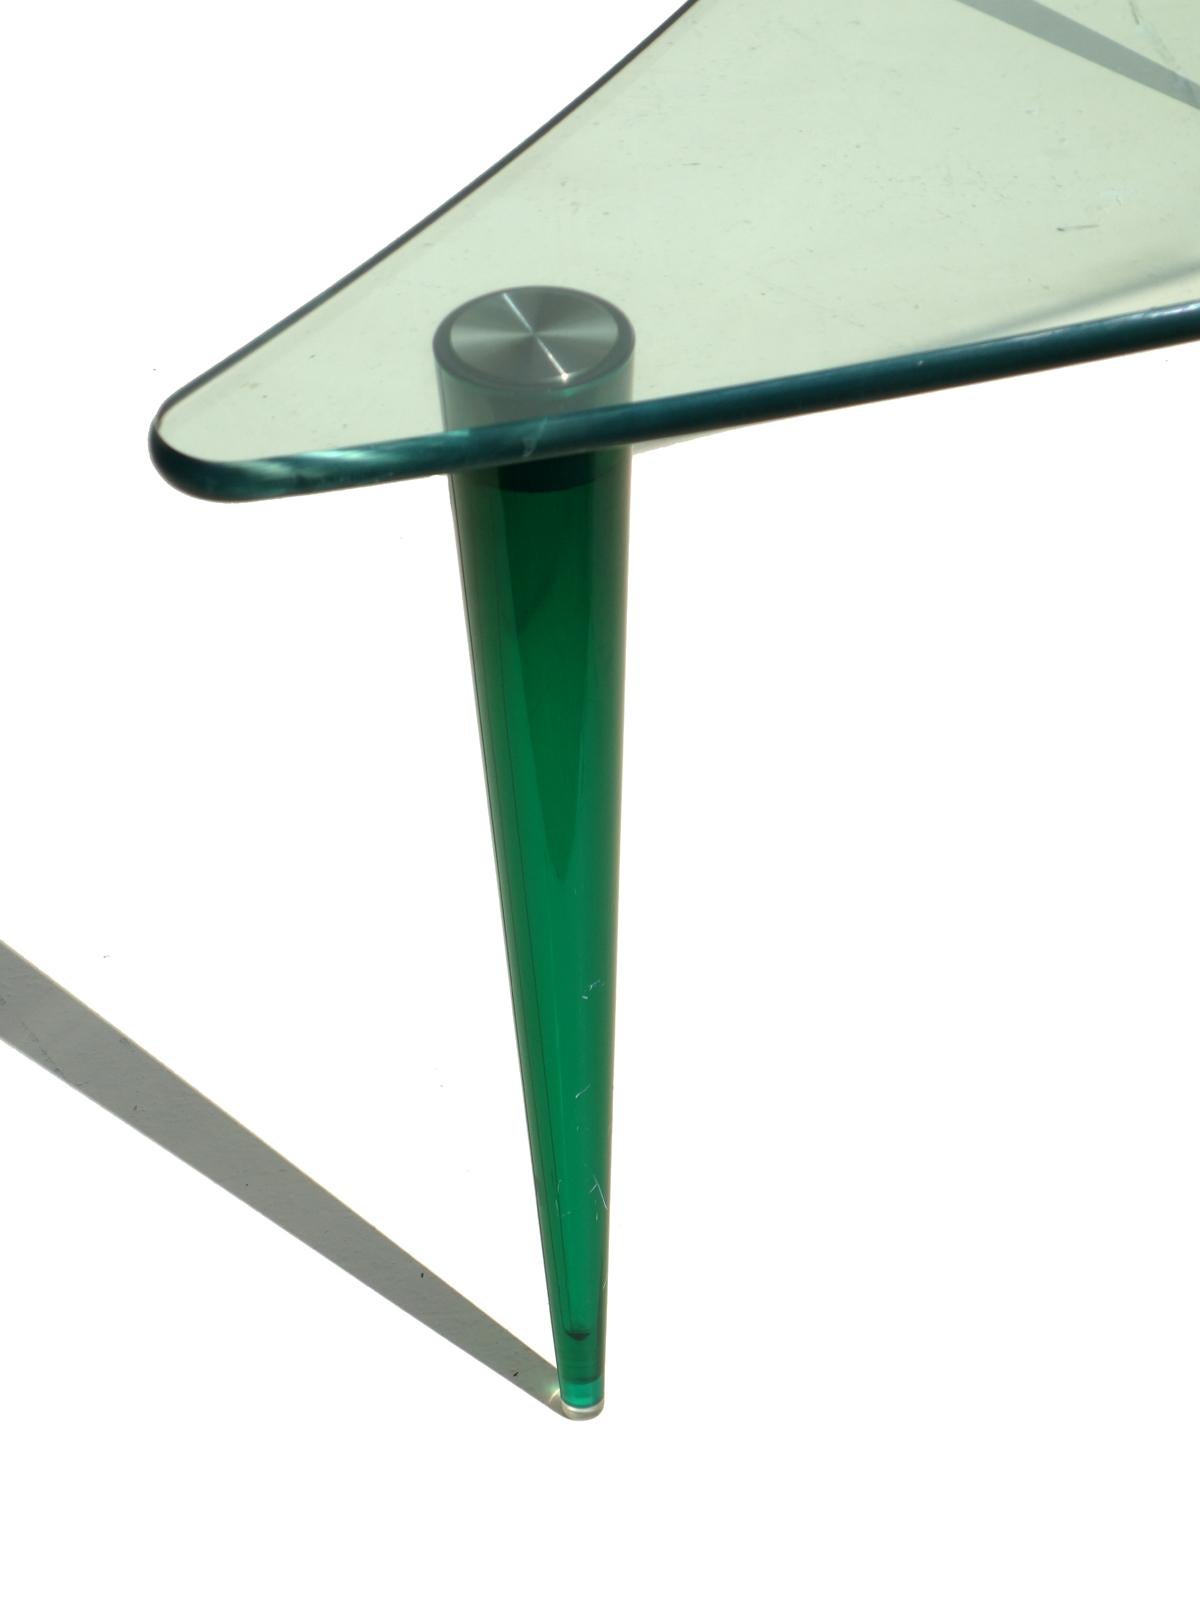 Green polycarbonate and crystal top.